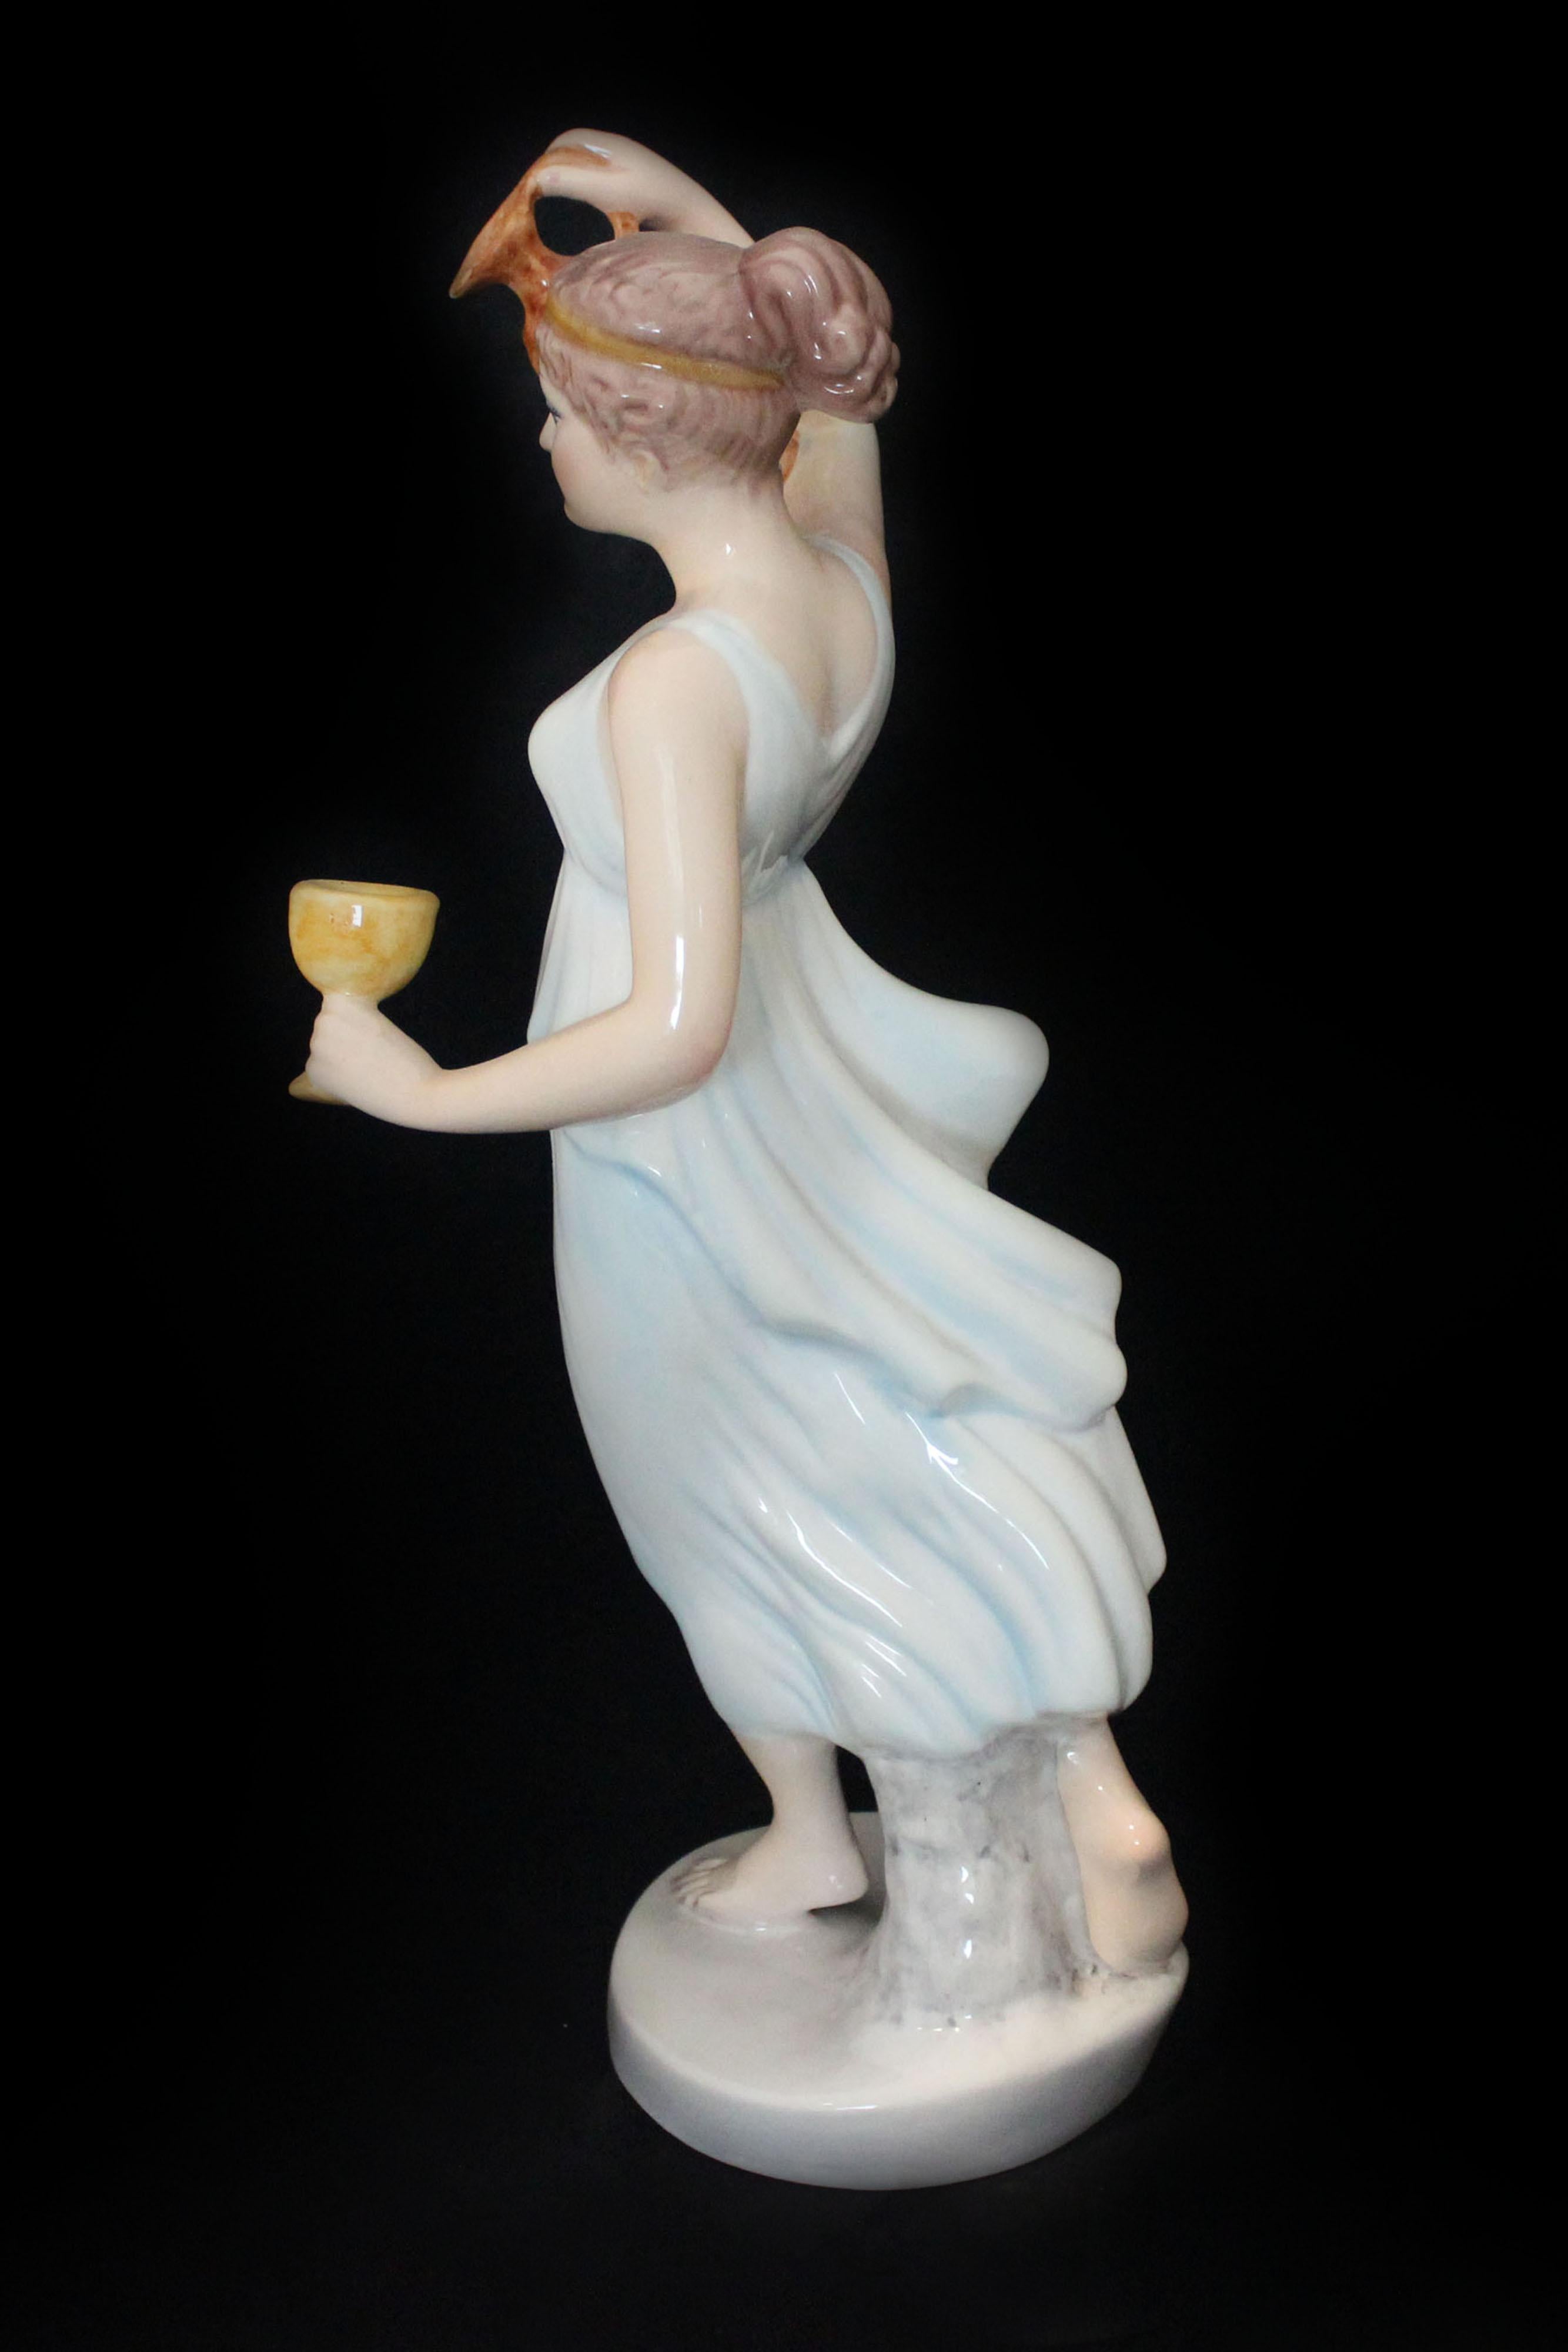 Art Deco Vestal Ceramic Figure With Jug and Goblet by Giovanni Ronzan for Ronzan, 1940s For Sale